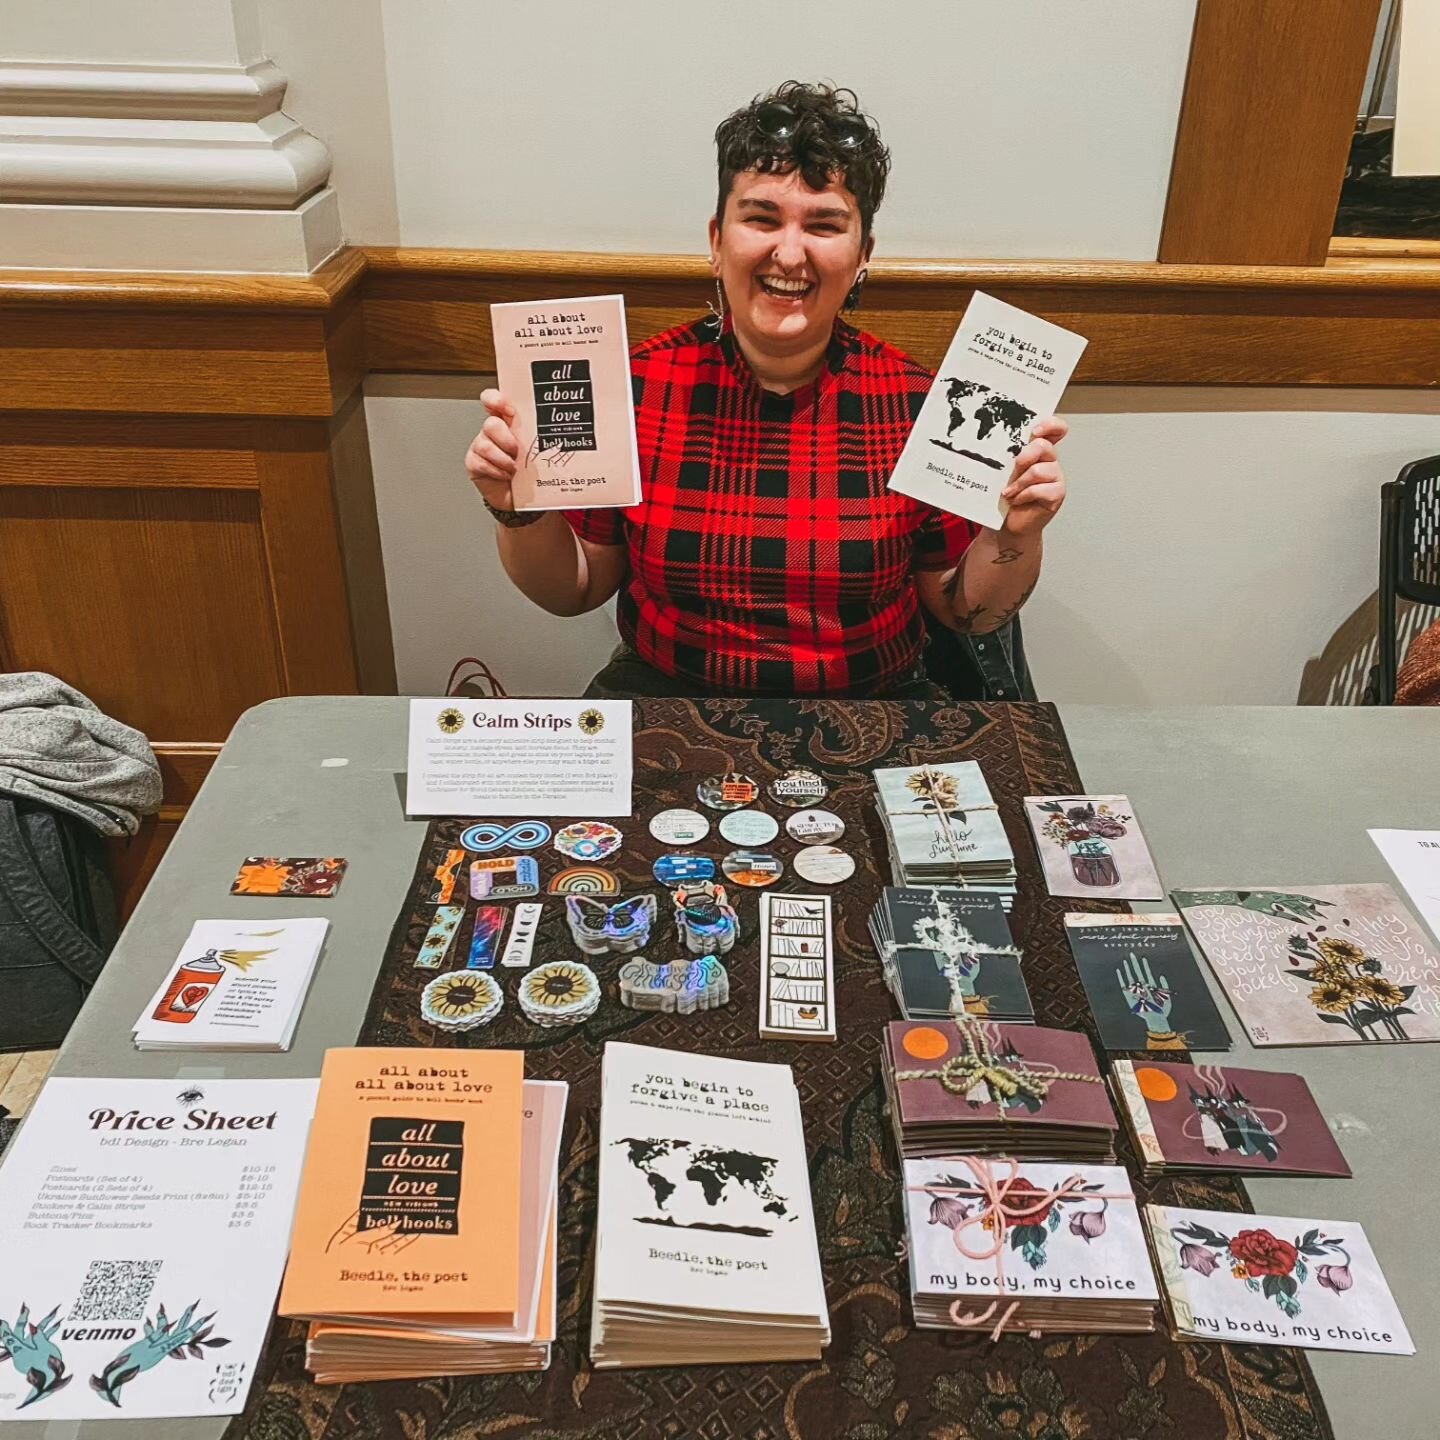 Thanks to everyone who stopped by my booth at @milwaukeezinefest this past weekend and picked up my lil flyers about this project! 

Thought I'd introduce myself! 
Hello! I'm Bre, aka @beedle.thepoet , a creative young professional living, working, a